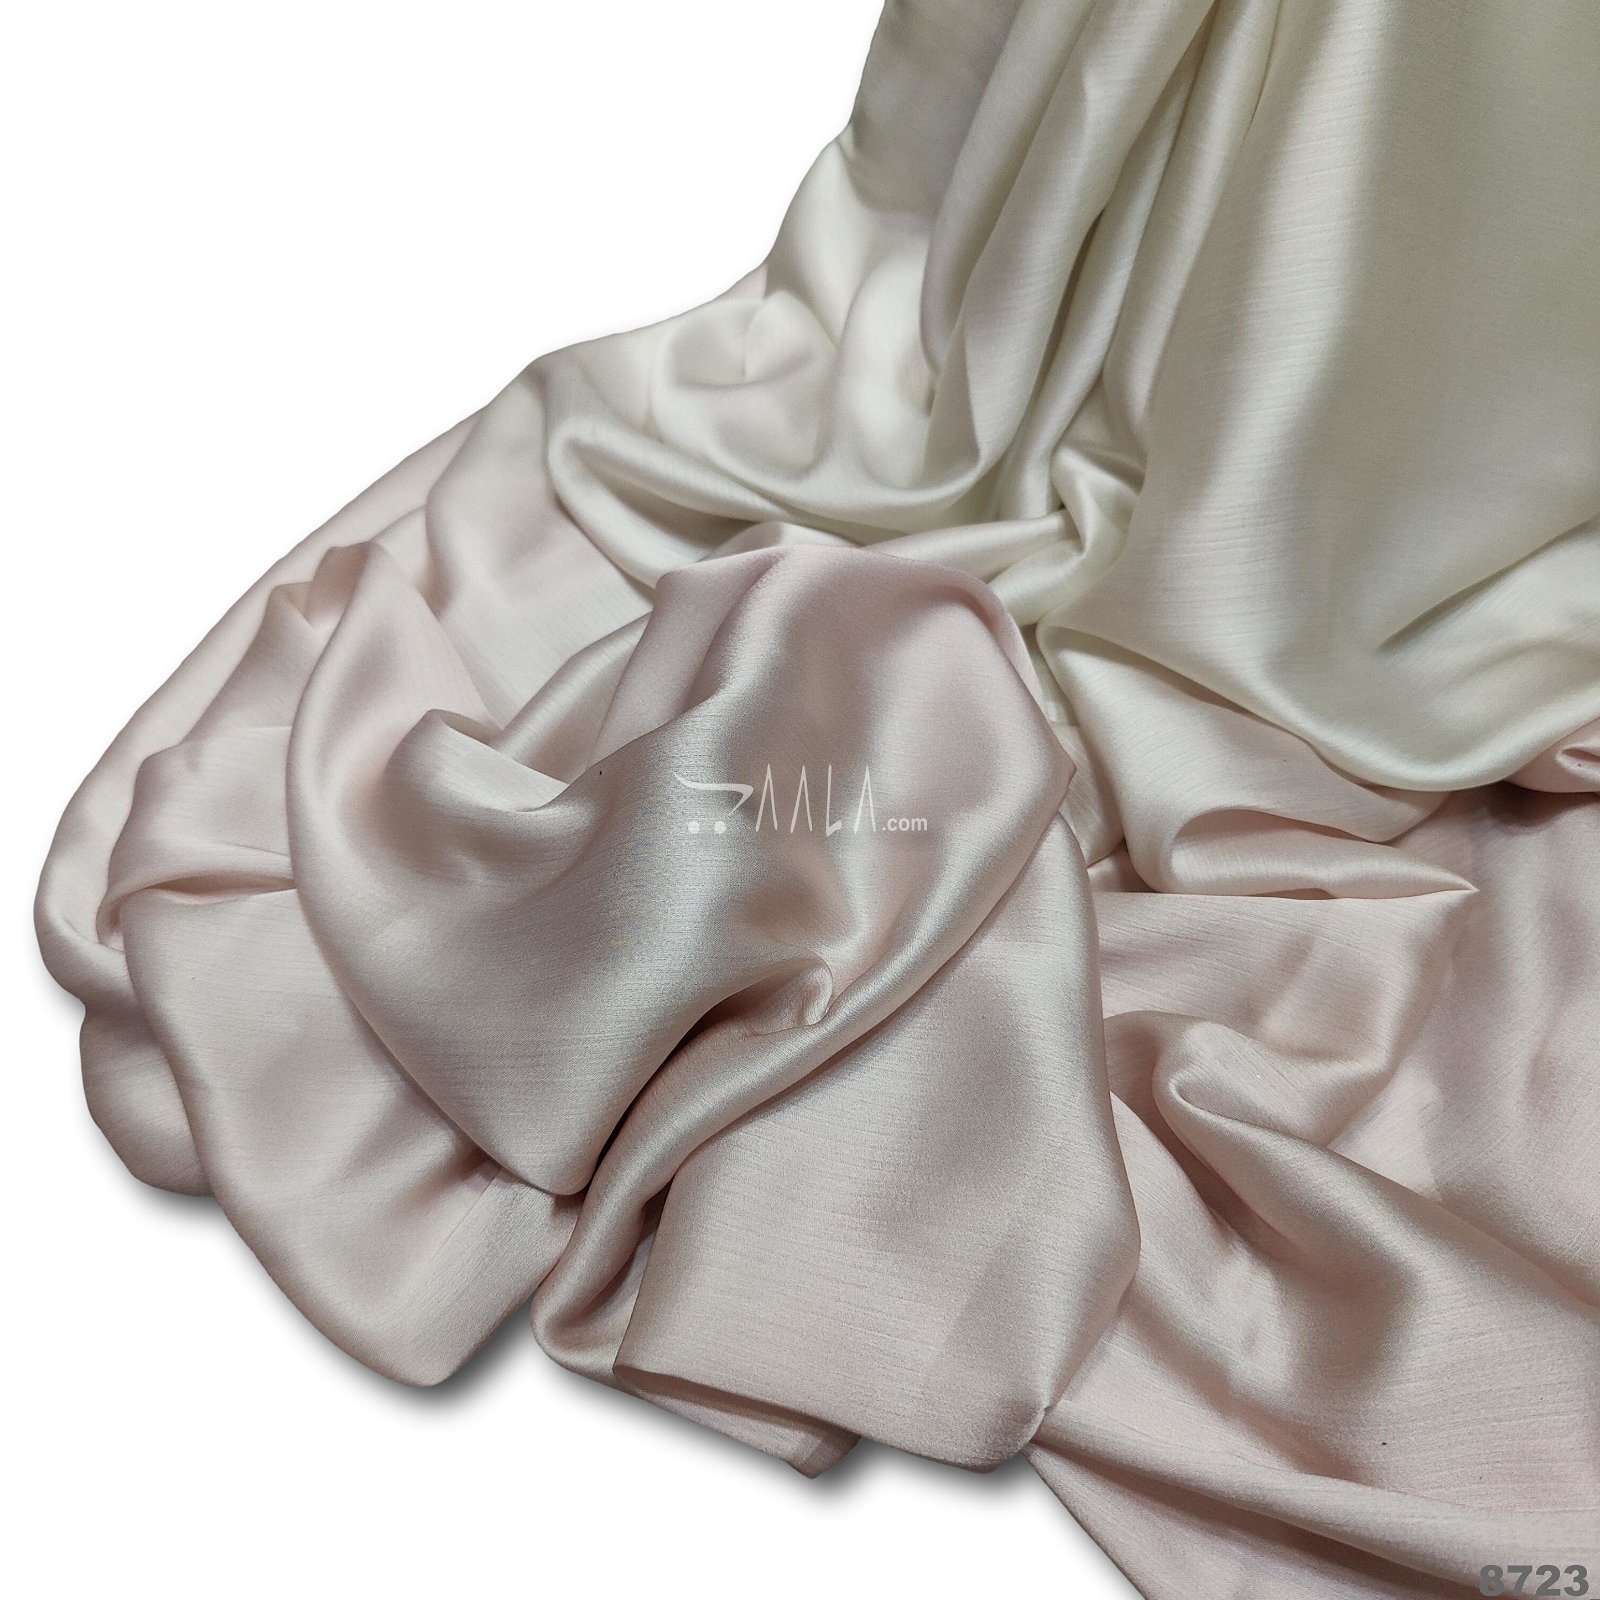 Shaded Satin-Chiffon Poly-ester 44-Inches ASSORTED Per-Metre #8723